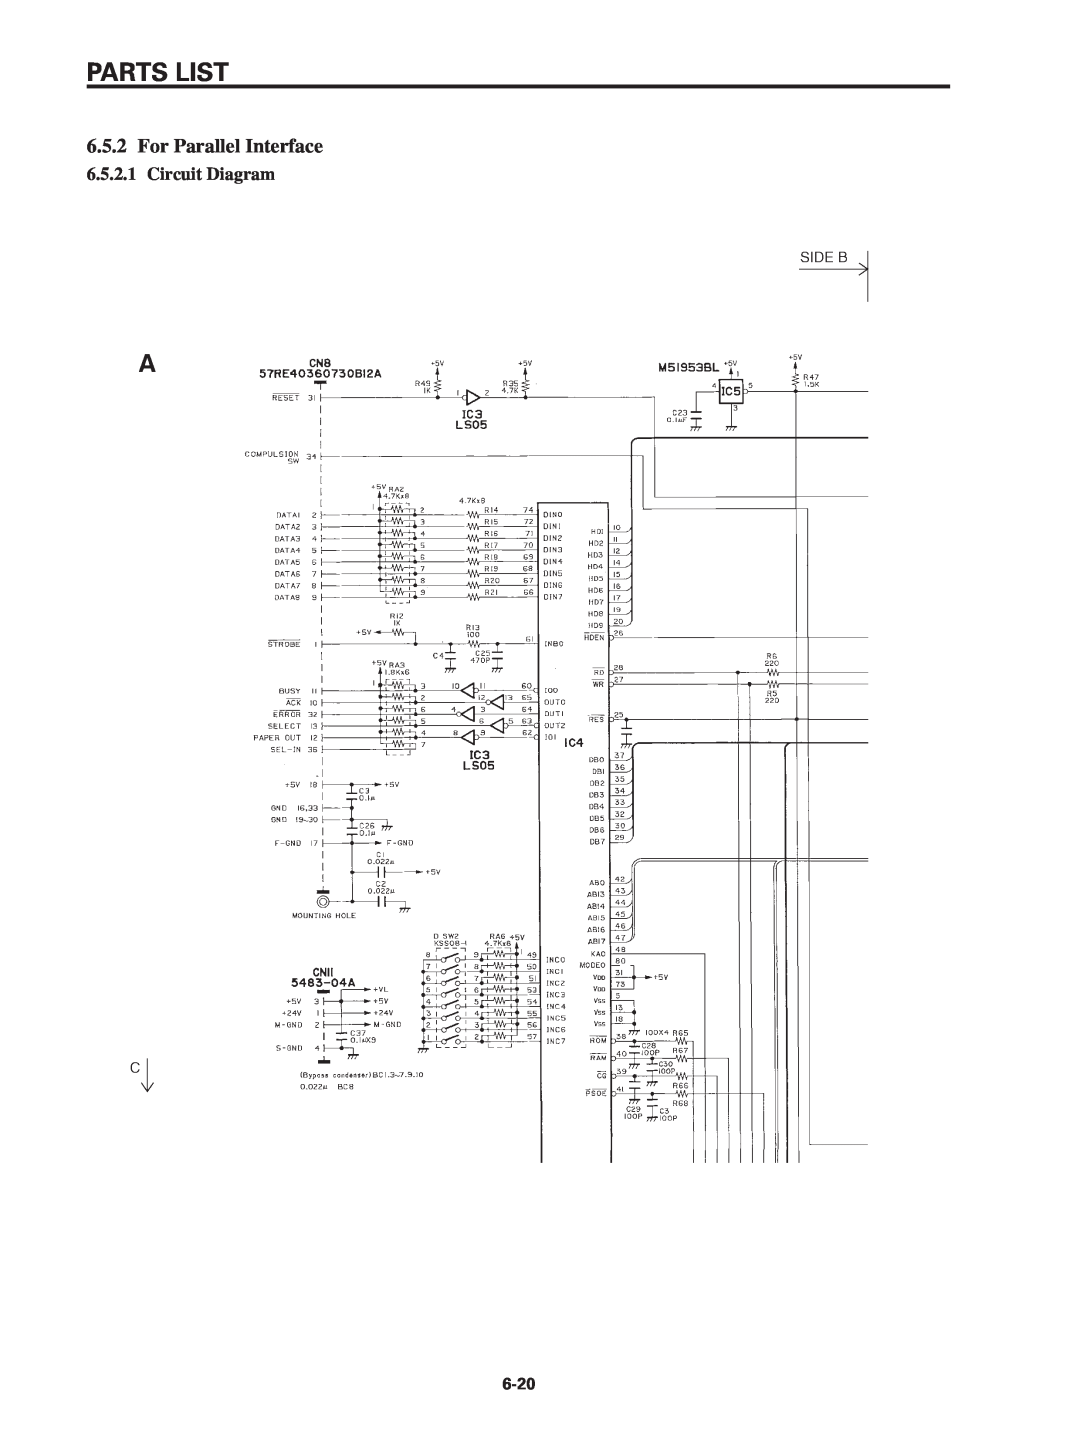 Star Micronics SP320S technical manual For Parallel Interface, Parts List, Circuit Diagram 